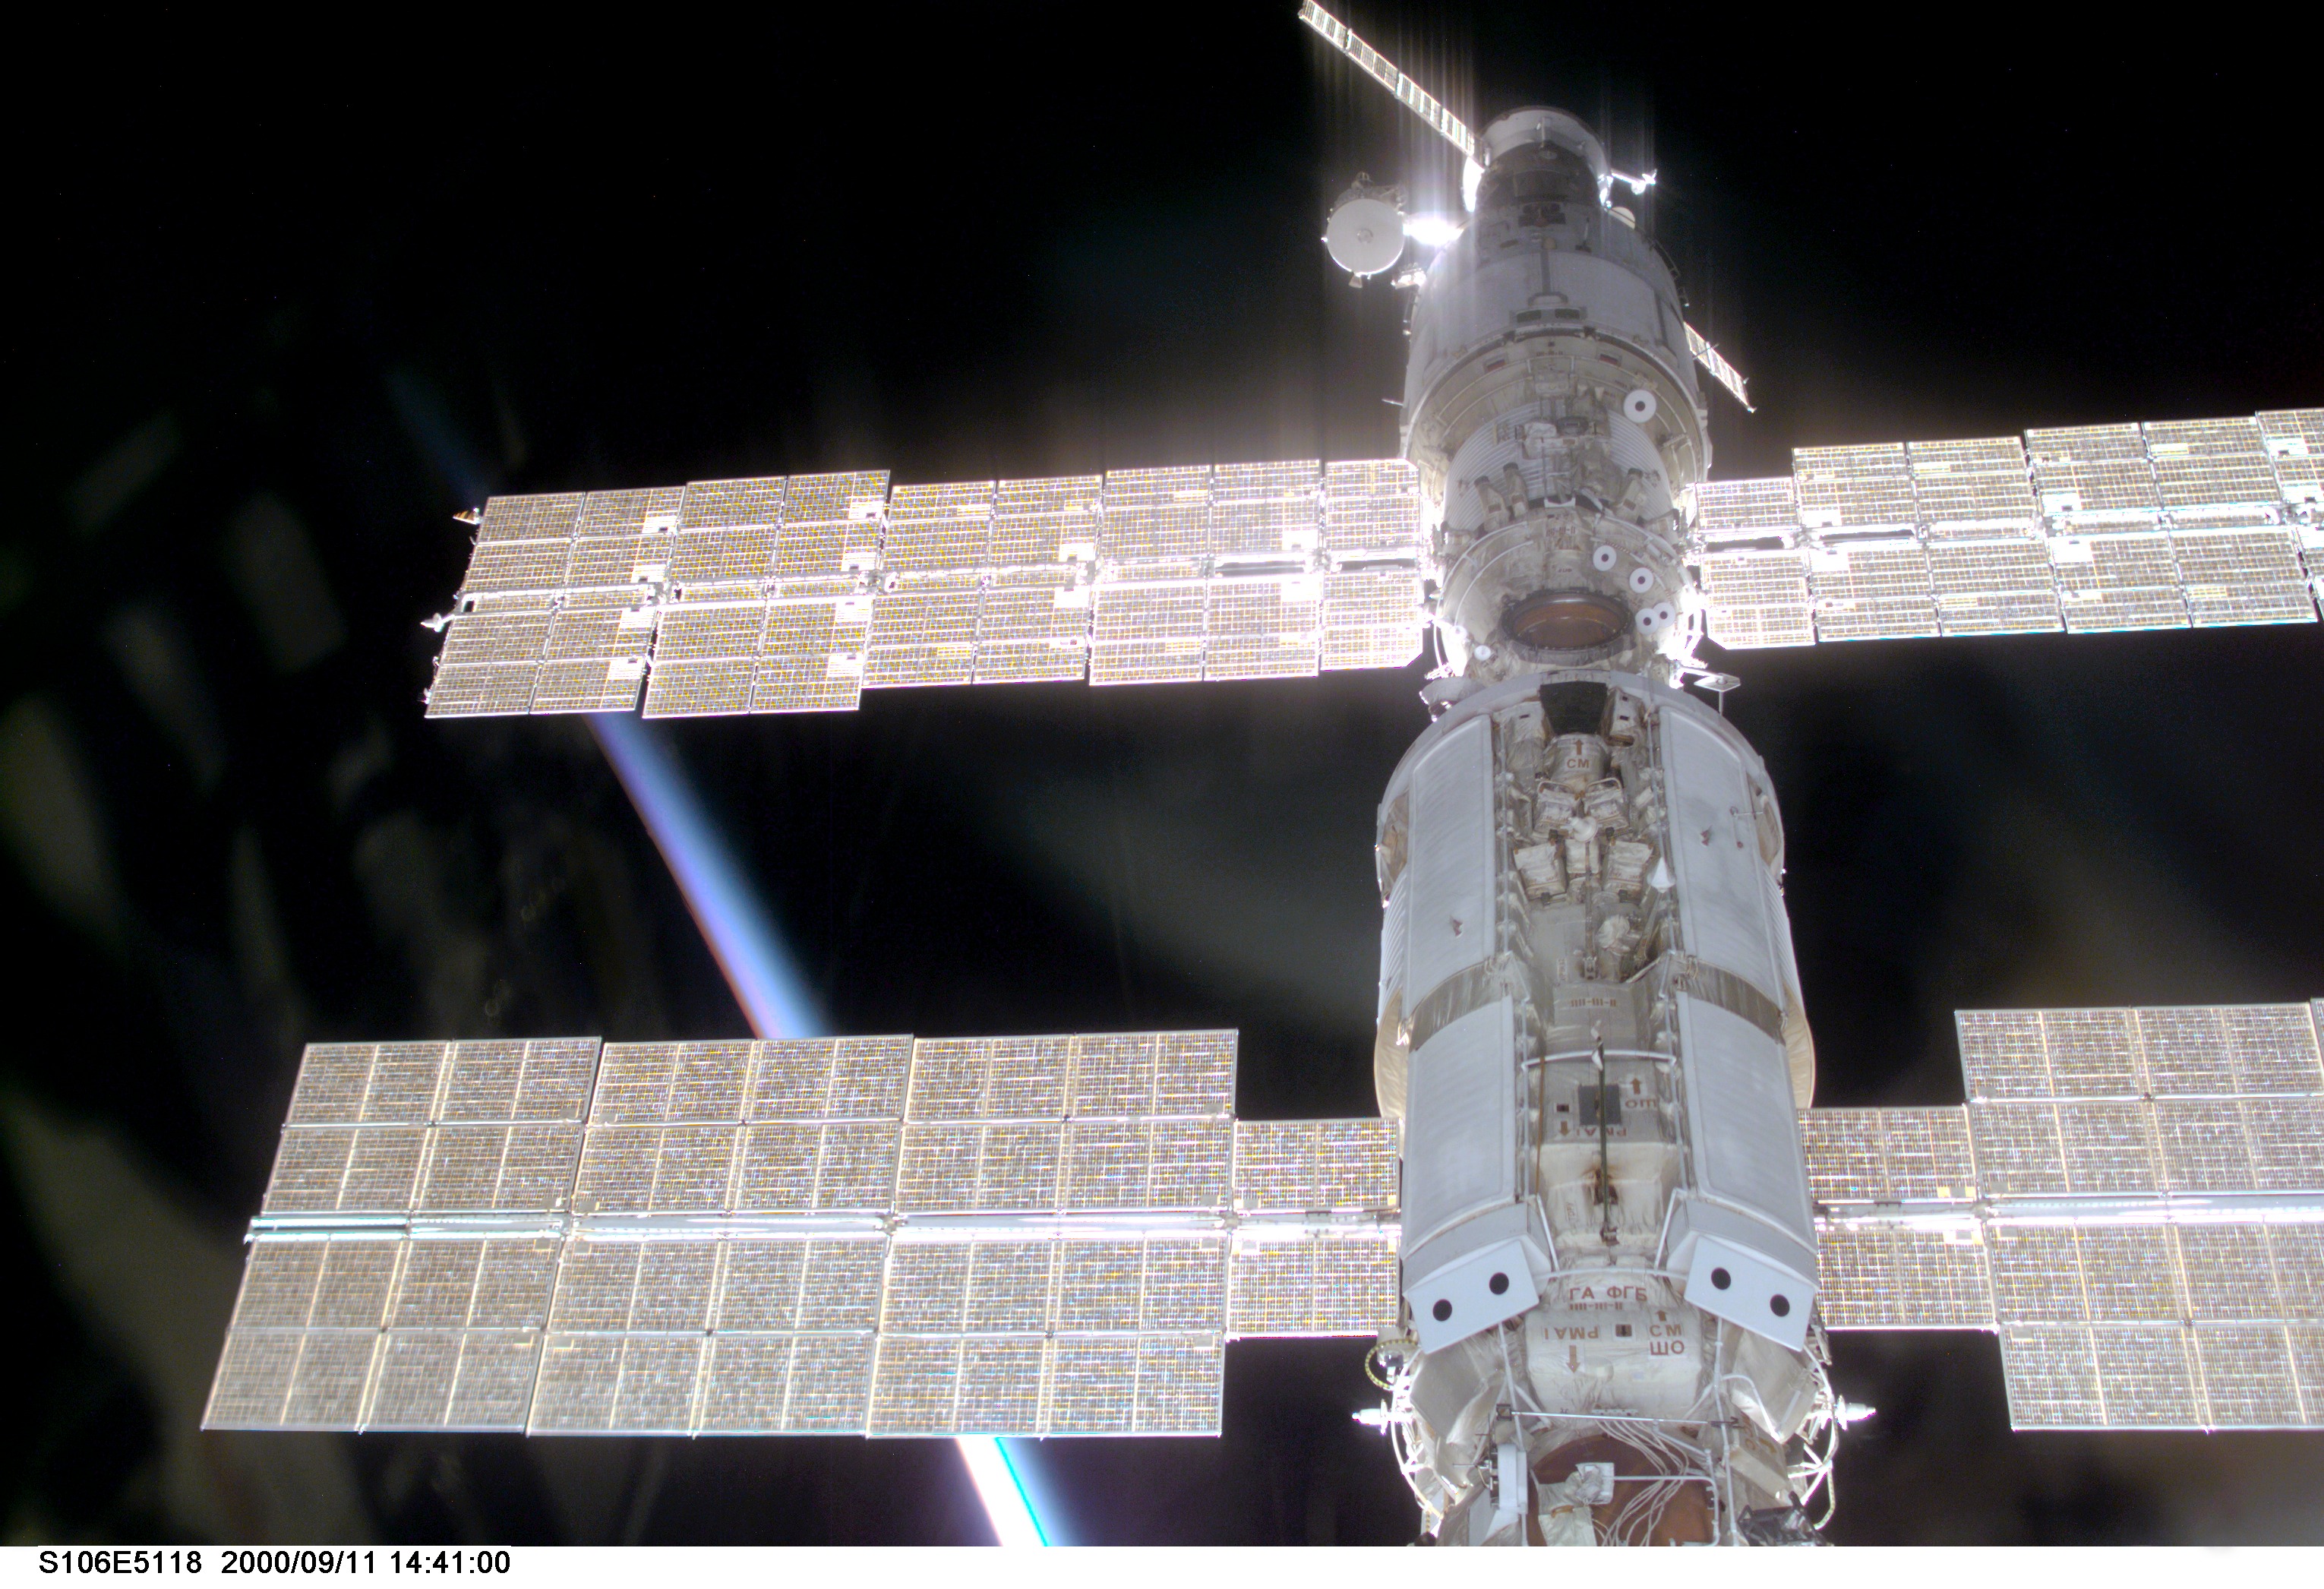 The Zvezda (upper) and Zarya (lower) modules provided the critical cornerstone for early International Space Station (ISS) operations. Fifteen years ago, this week, STS-106 resumed work on the stalled construction effort. Photo Credit: NASA